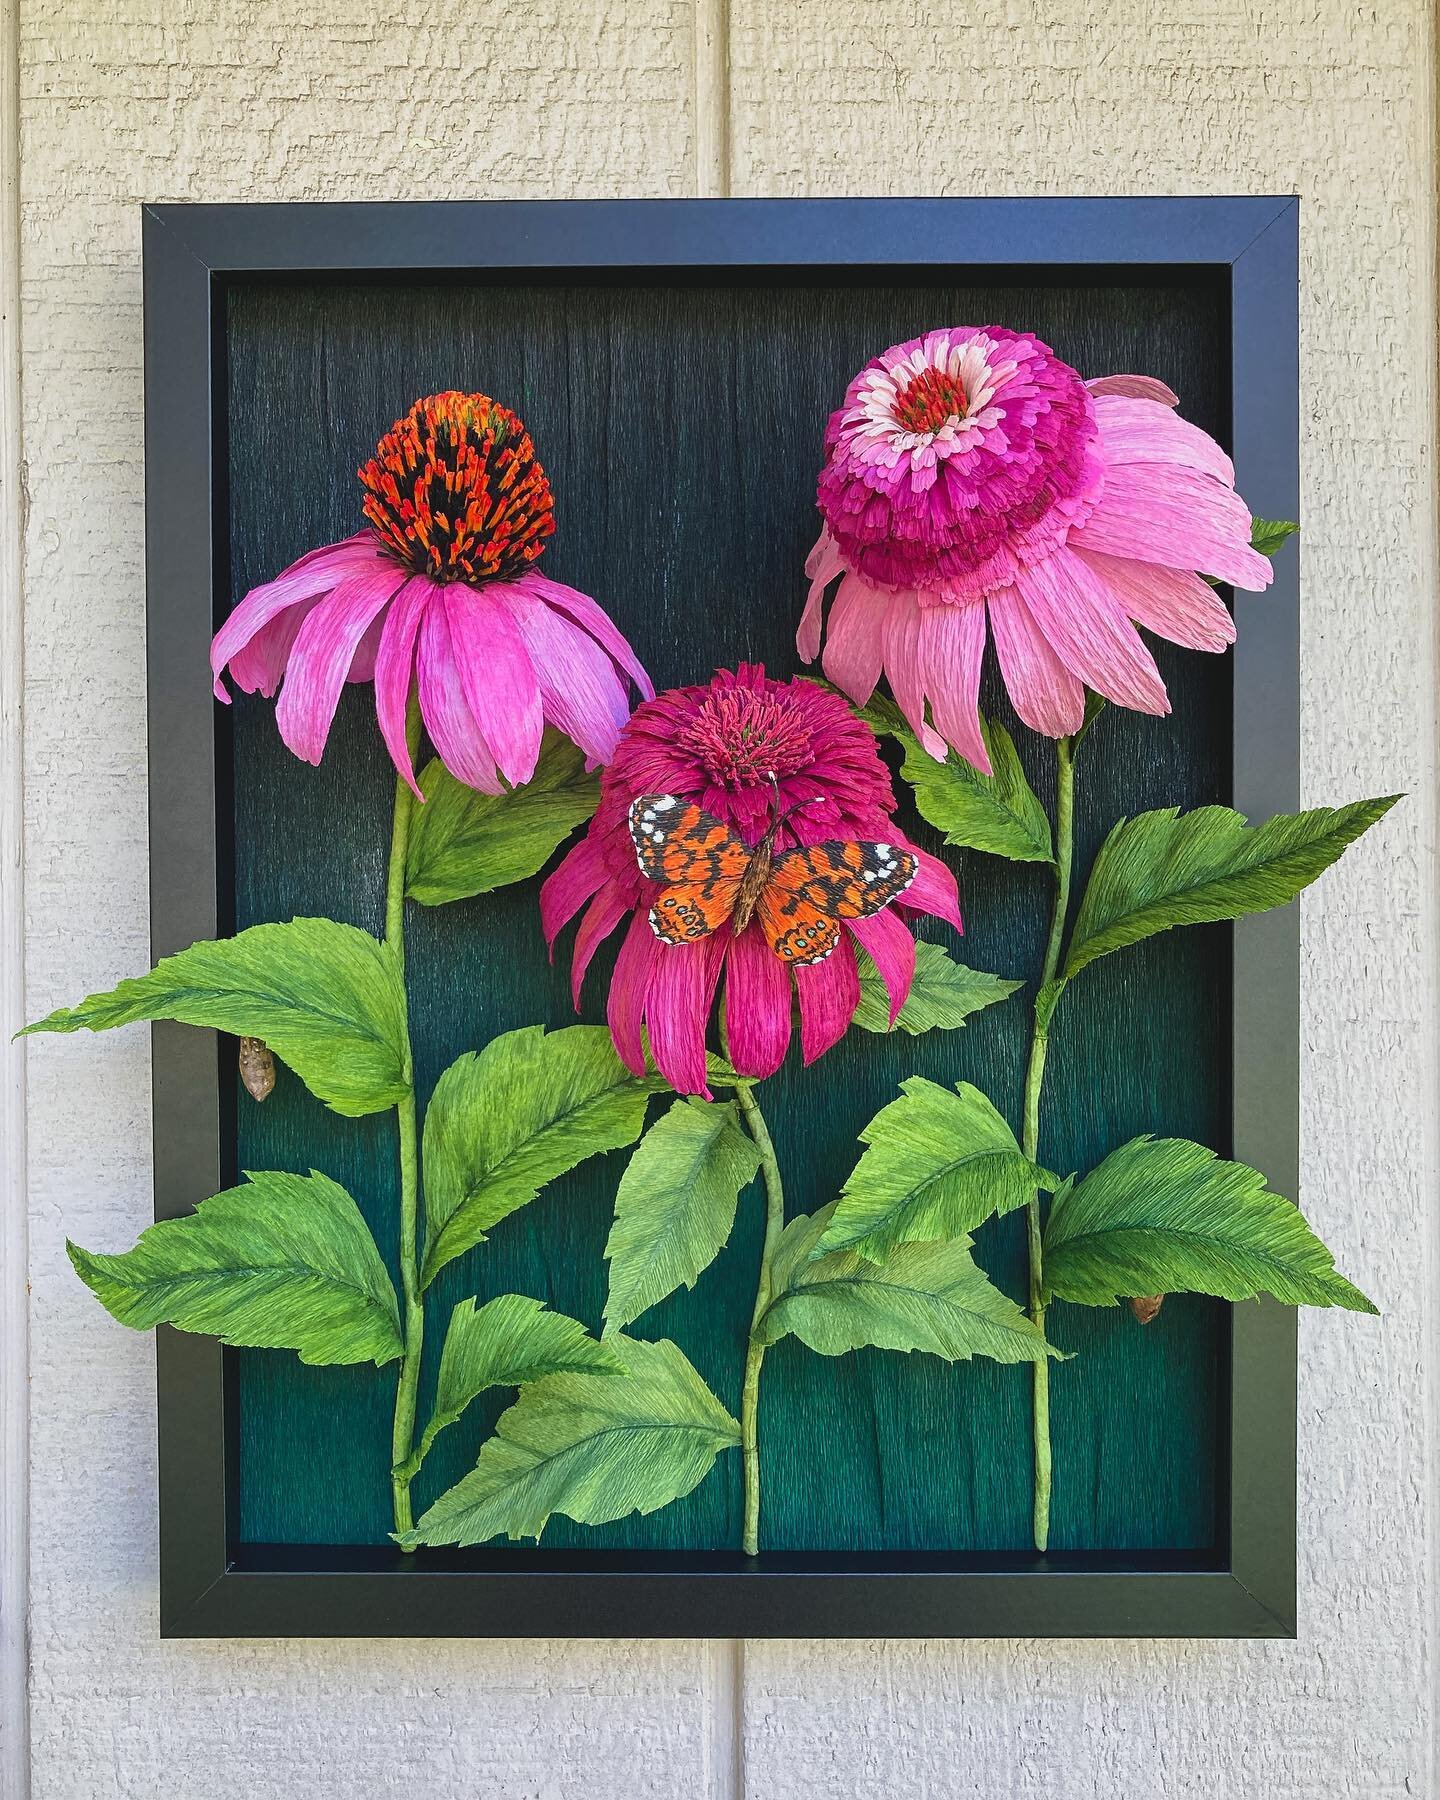 My completed project for the @olyphant_artsupply contest for spring arts walk. 3 echinacea flowers with west coast ladies. 

Purple echinacea, double scoop raspberry echinacea, and a pink double delight echinacea - all made with the same two Italian 